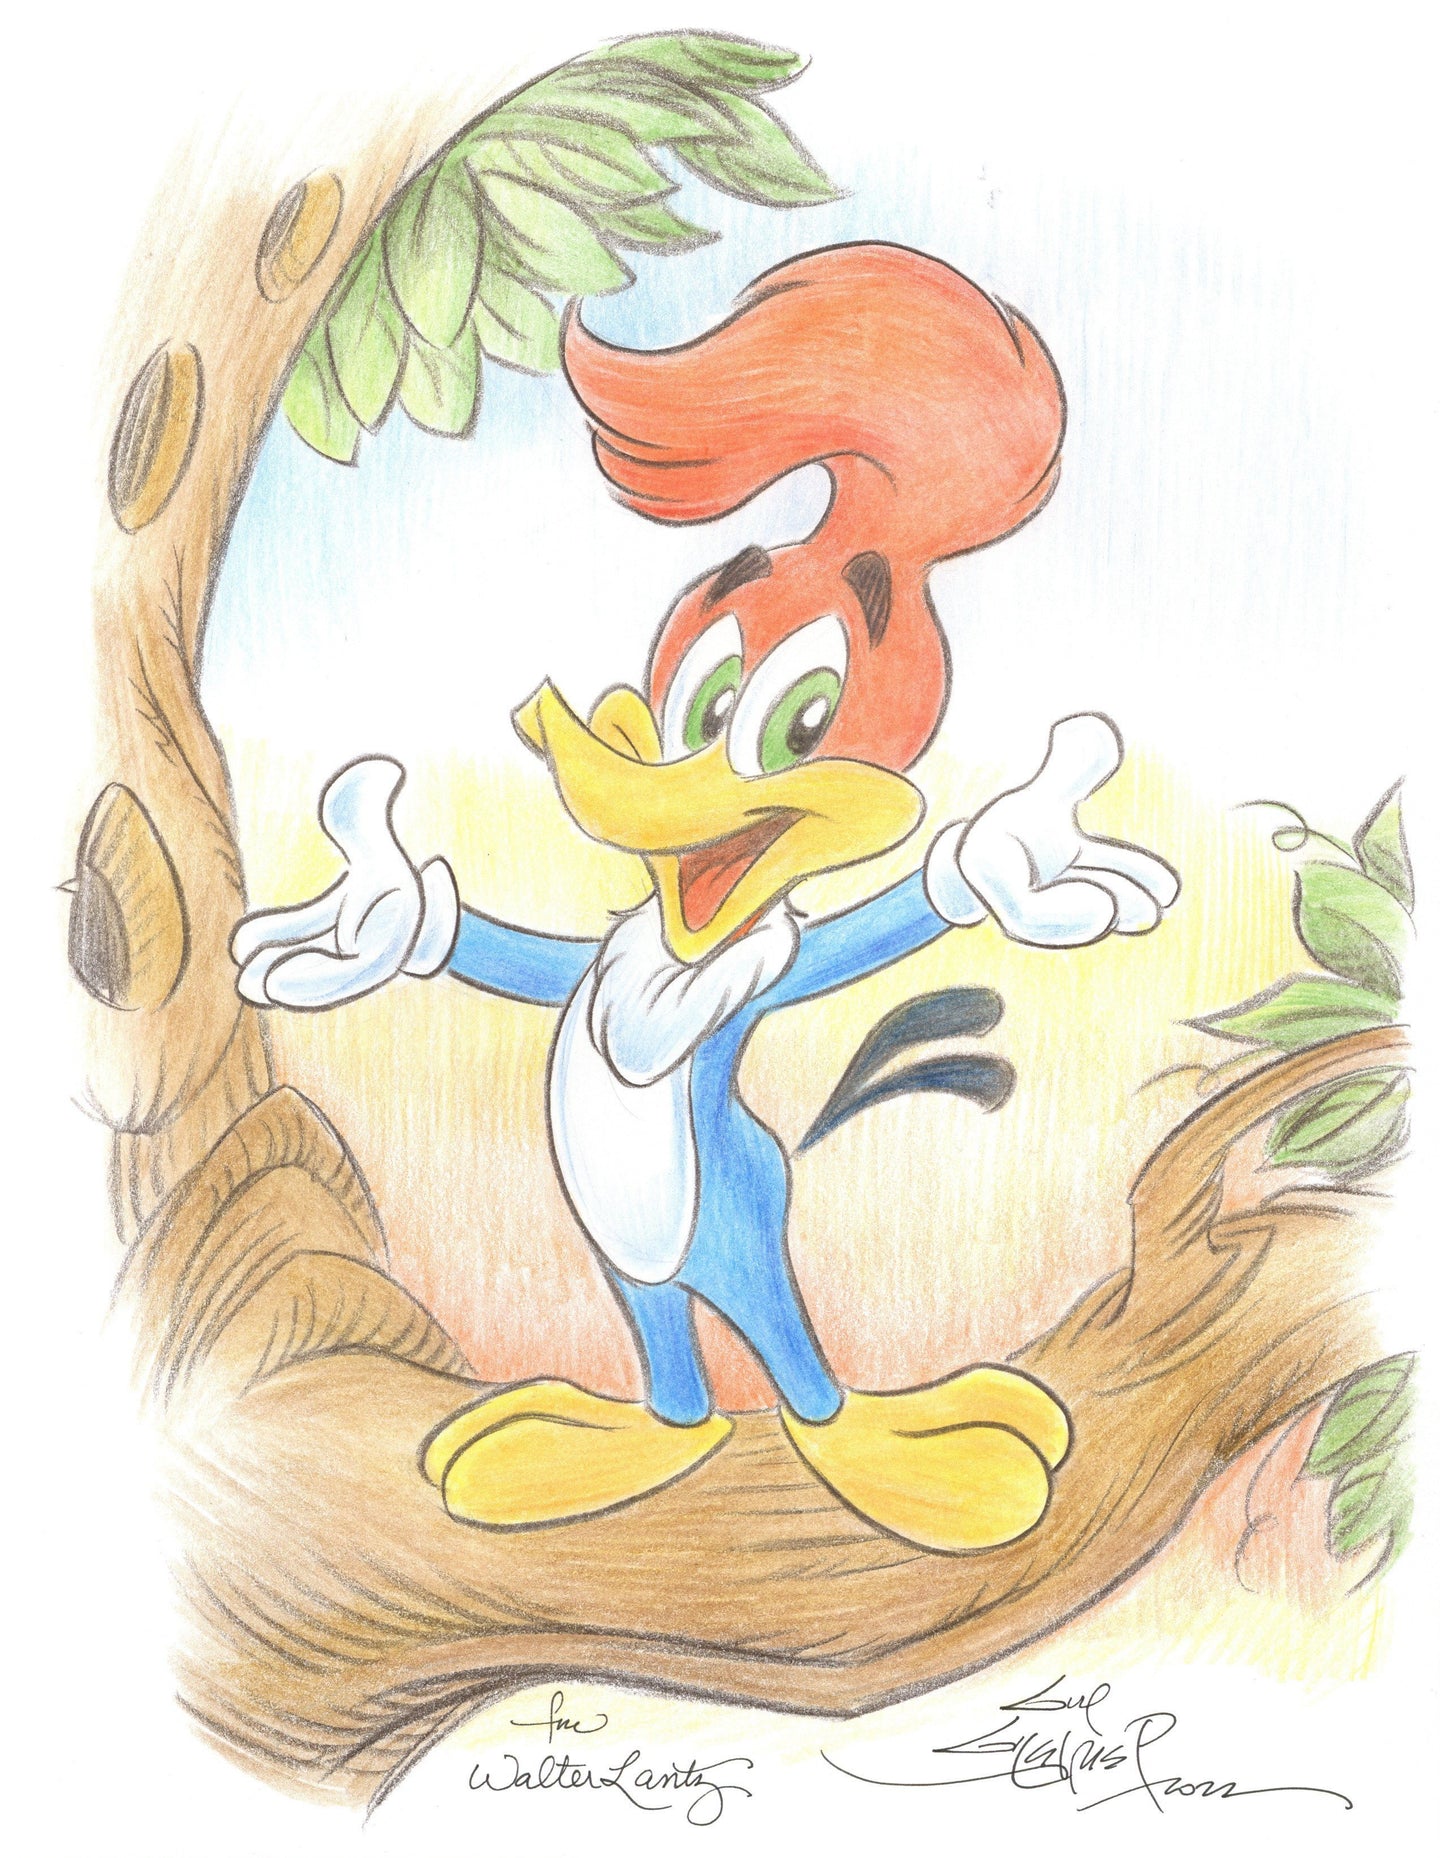 Woody Woodpecker Original Art 8.5x11 Sketch - Created by Guy Gilchrist